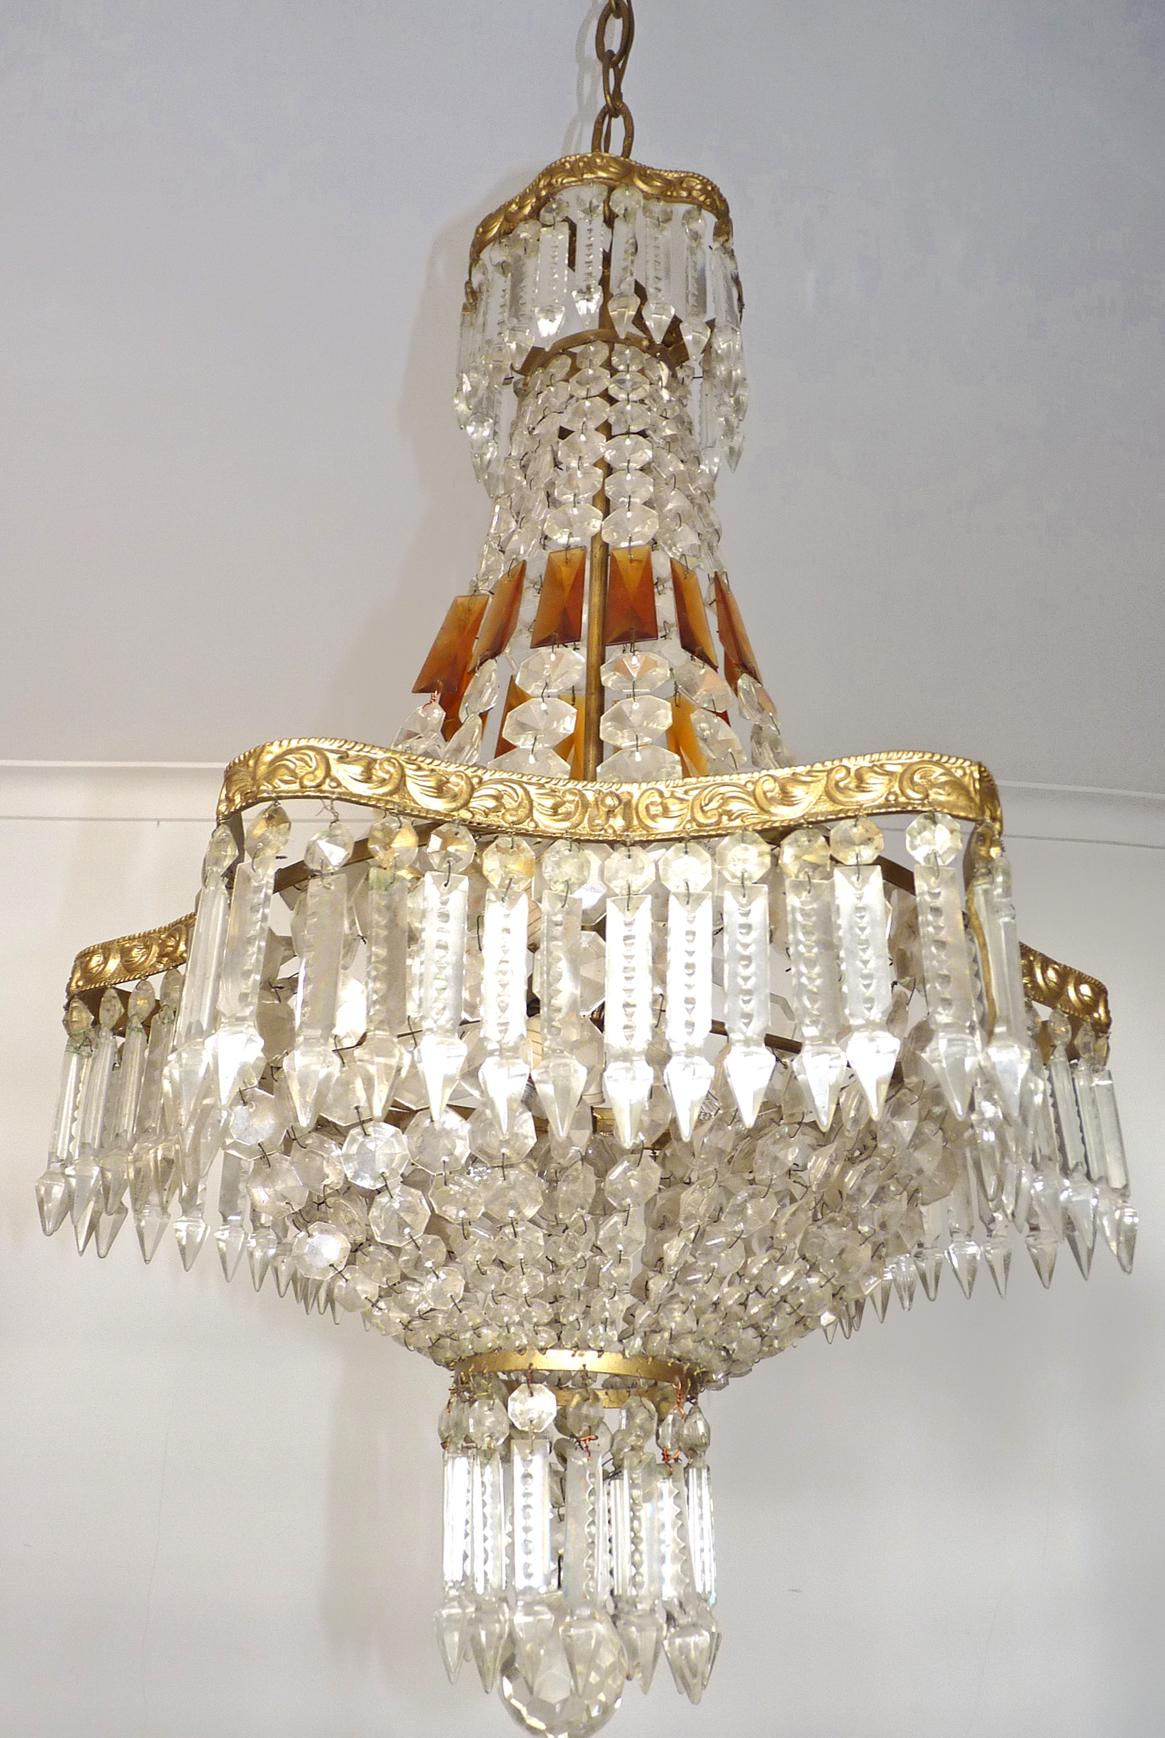 Six-light French Empire Amber crystal basket chandelier with a hexagonal gilt bronze frame.
Measures:
Diameter 19 in/ 48 cm
Height 43.3 in(10 in Chain) / 110 cm (25 cm Chain)
Weight: 20 lb/ 9 Kg
Six light bulbs E14, good working condition,